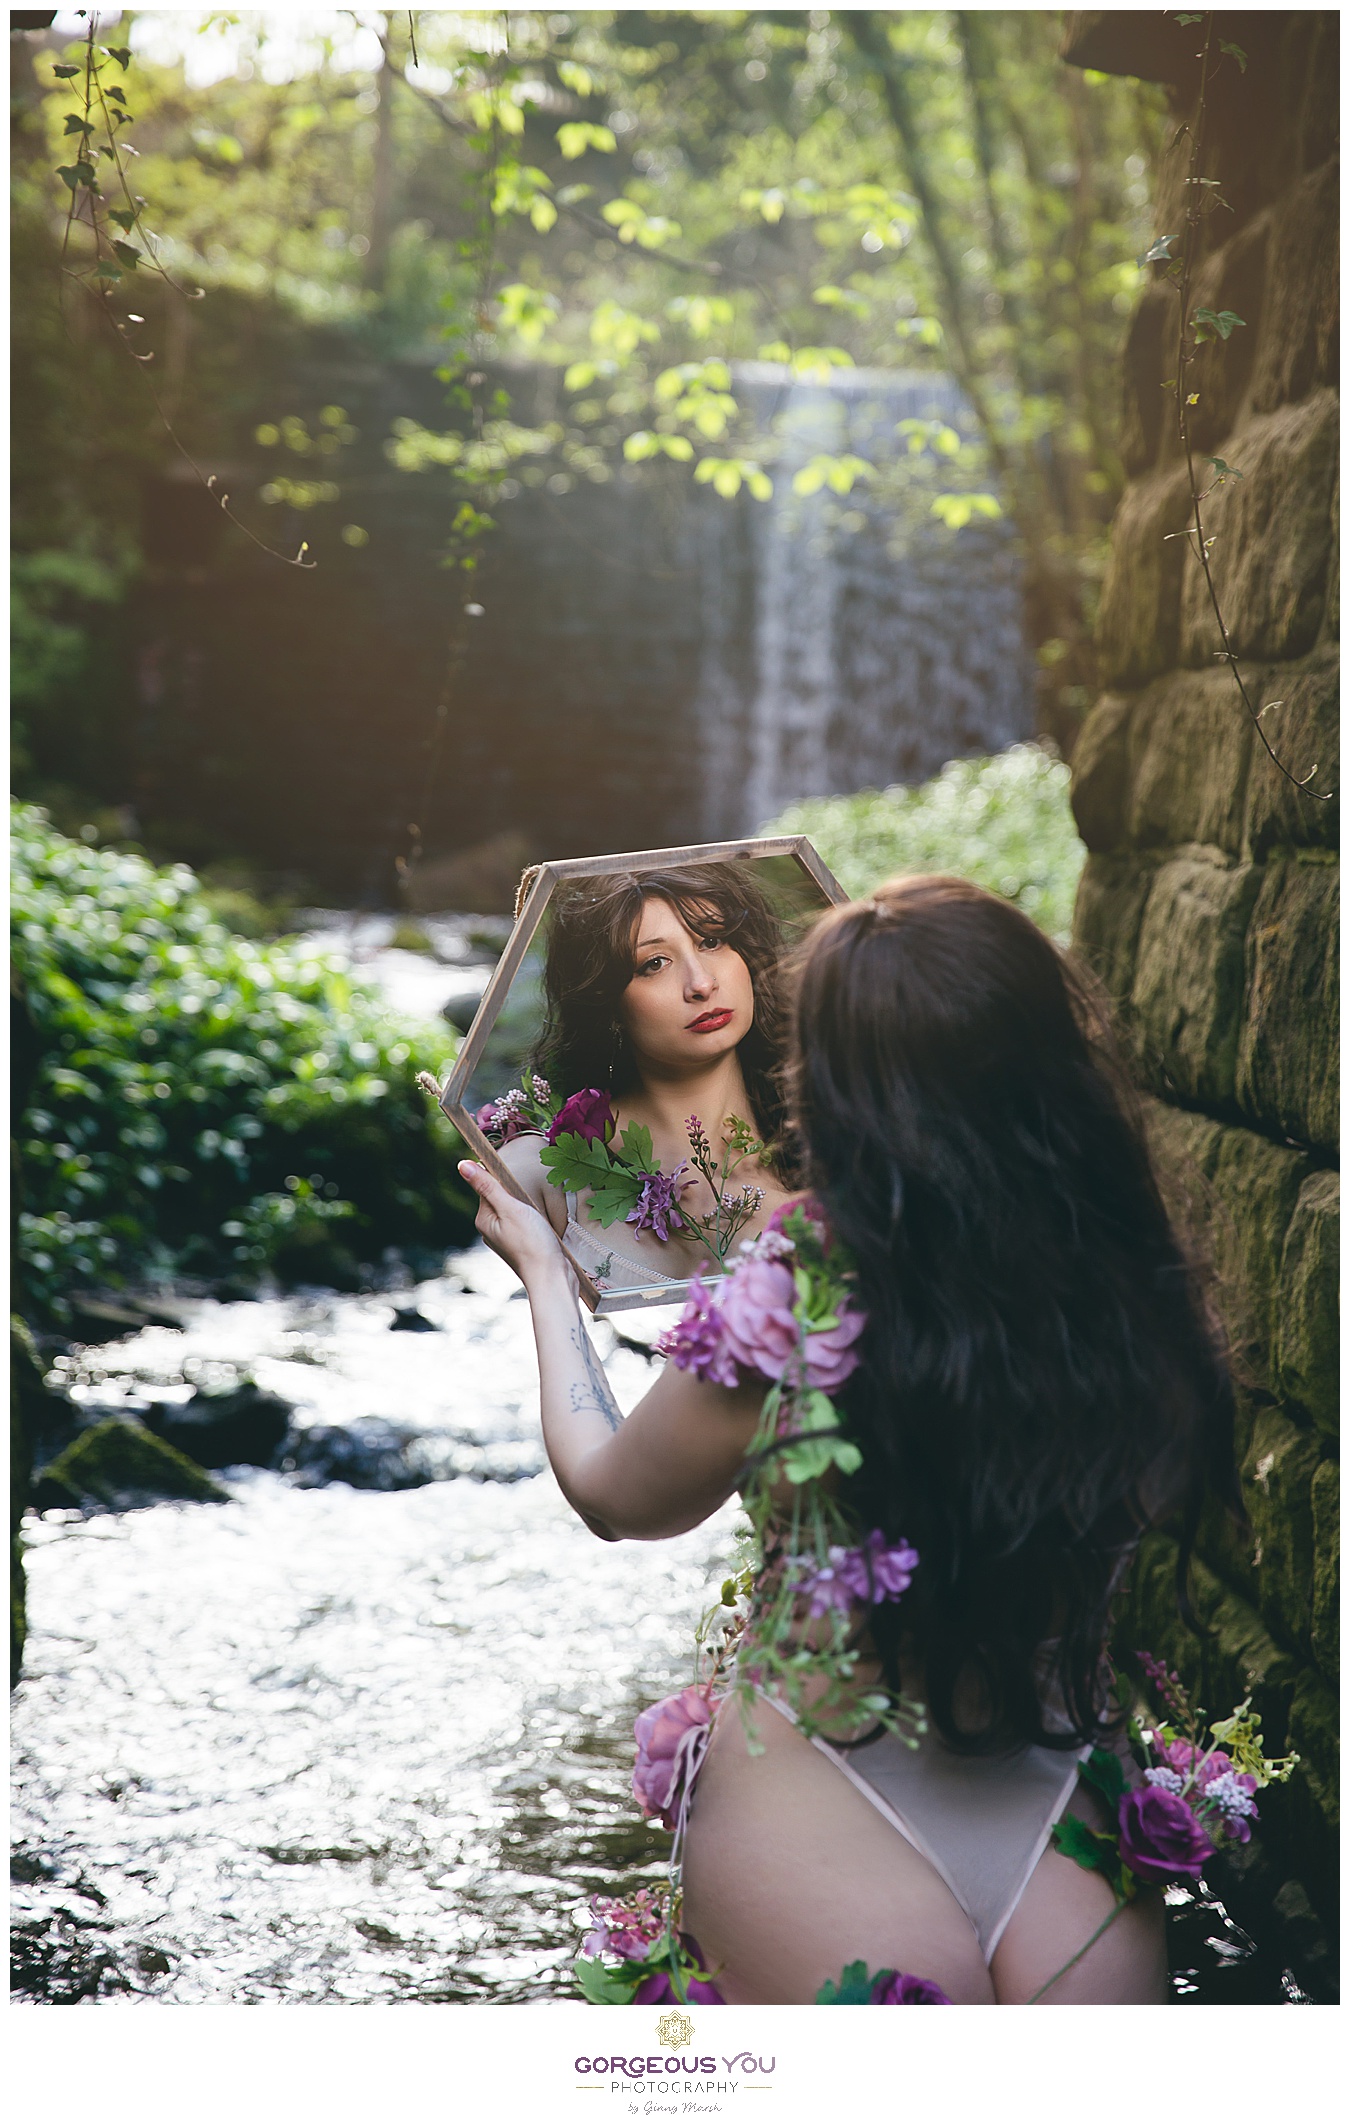 Looking in the mirror - self-reflection - in front of a waterfall | Divine feminine goddess boudoir photoshoot | Gorgeous You Photography | North Yorkshire